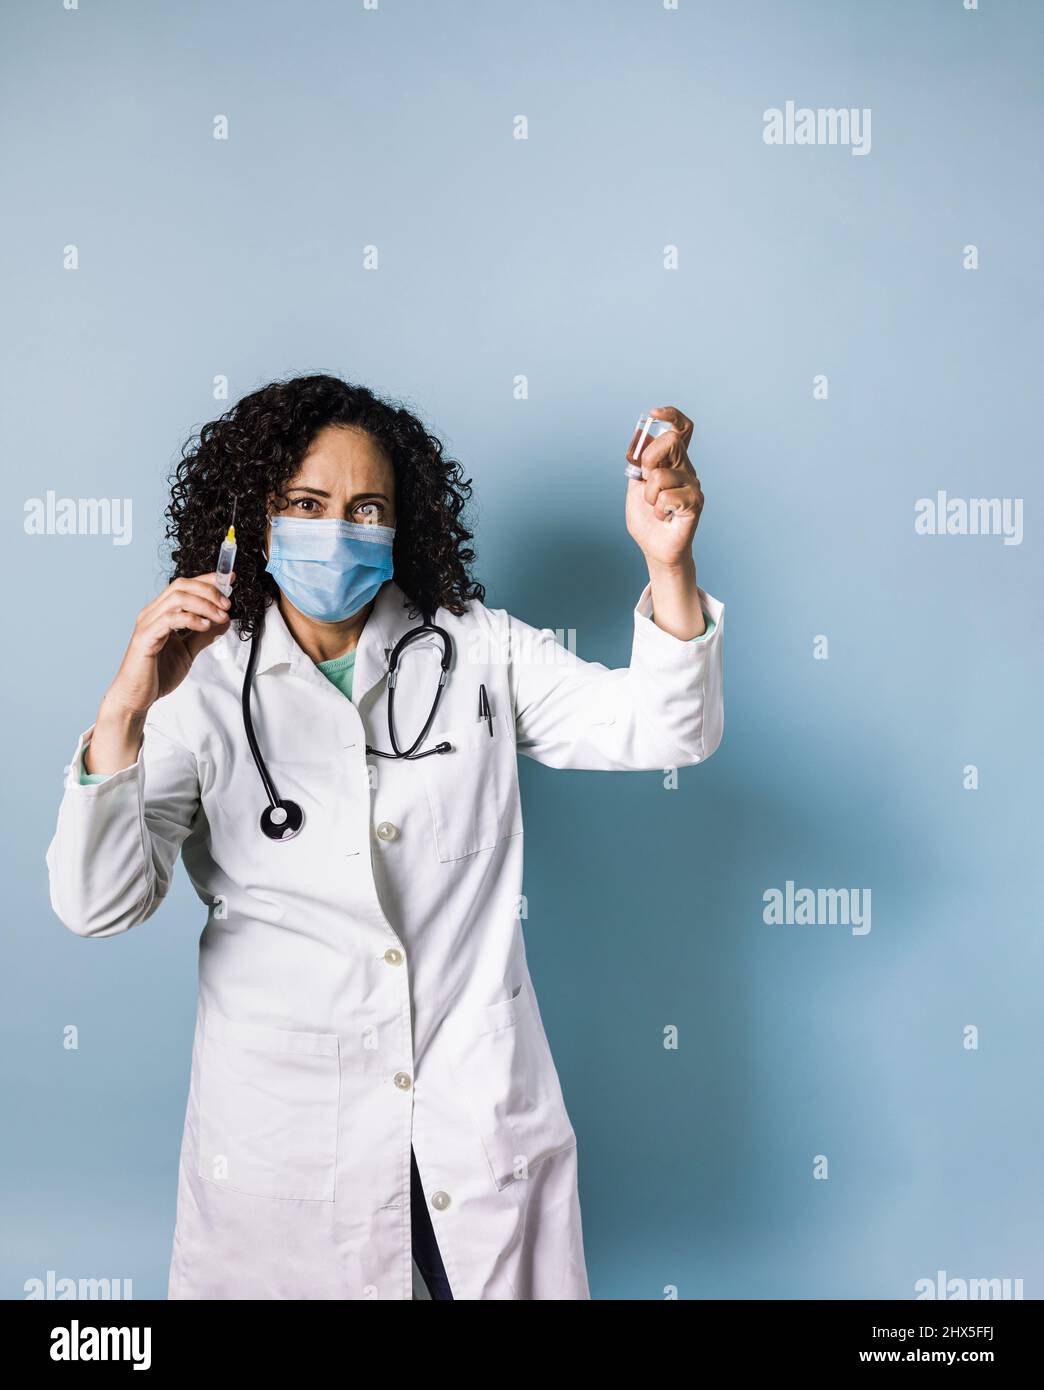 hispanic woman doctor with wavy hair holding vaccine injection for pandemic in Mexico latin America Stock Photo